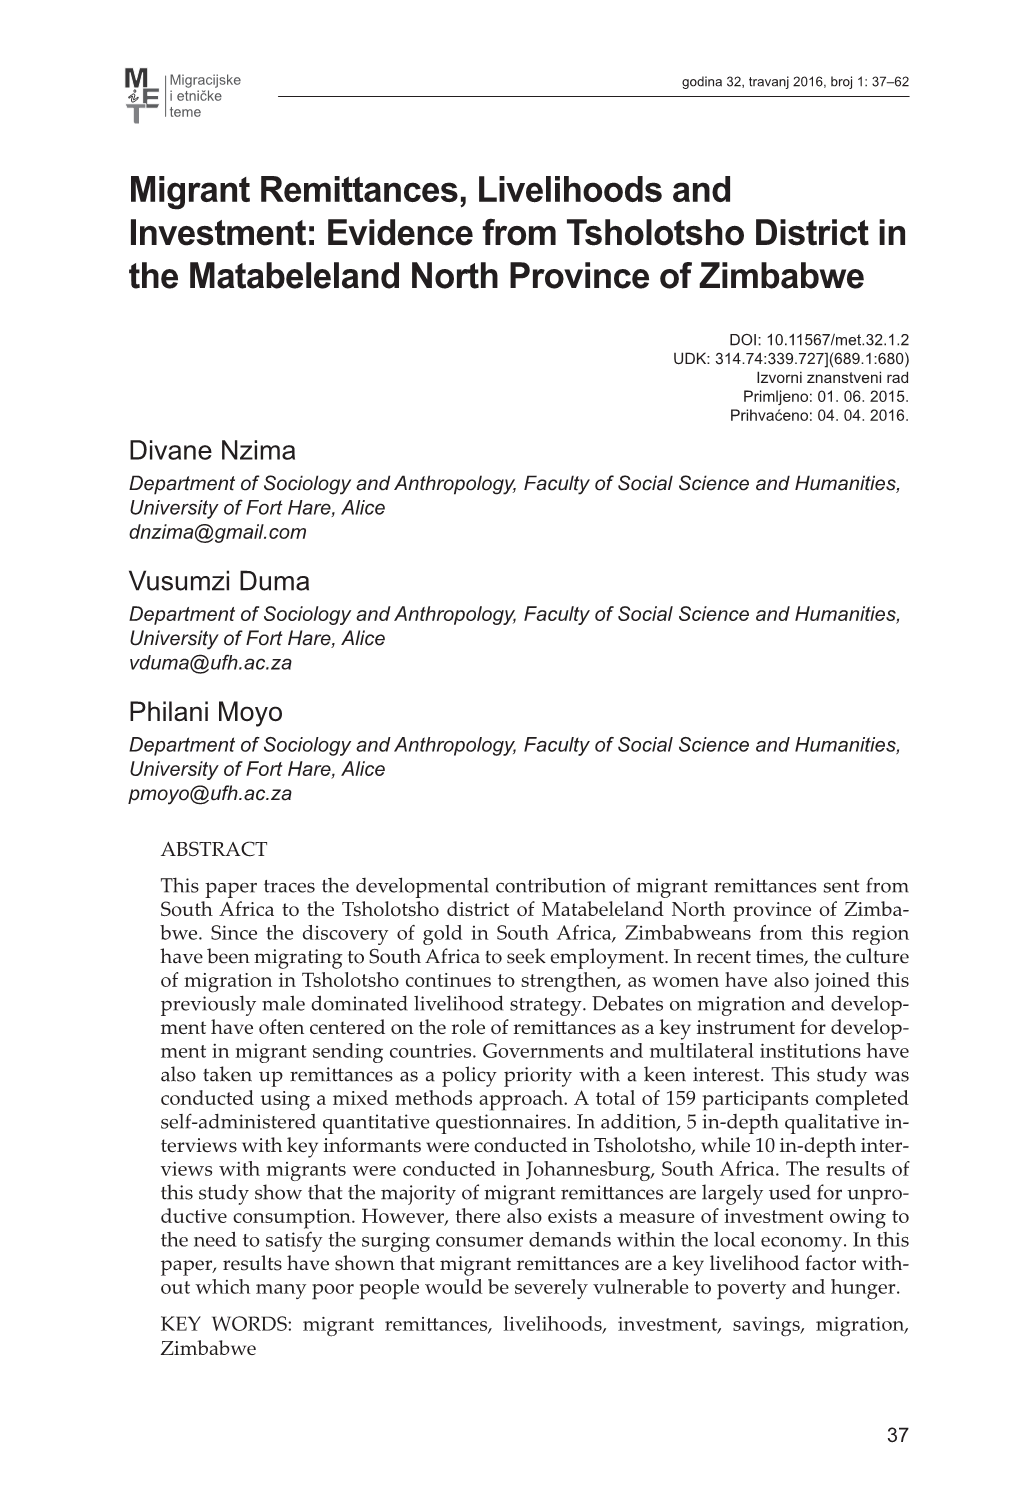 Migrant Remittances, Livelihoods and Investment: Evidence from Tsholotsho District in the Matabeleland North Province of Zimbabwe